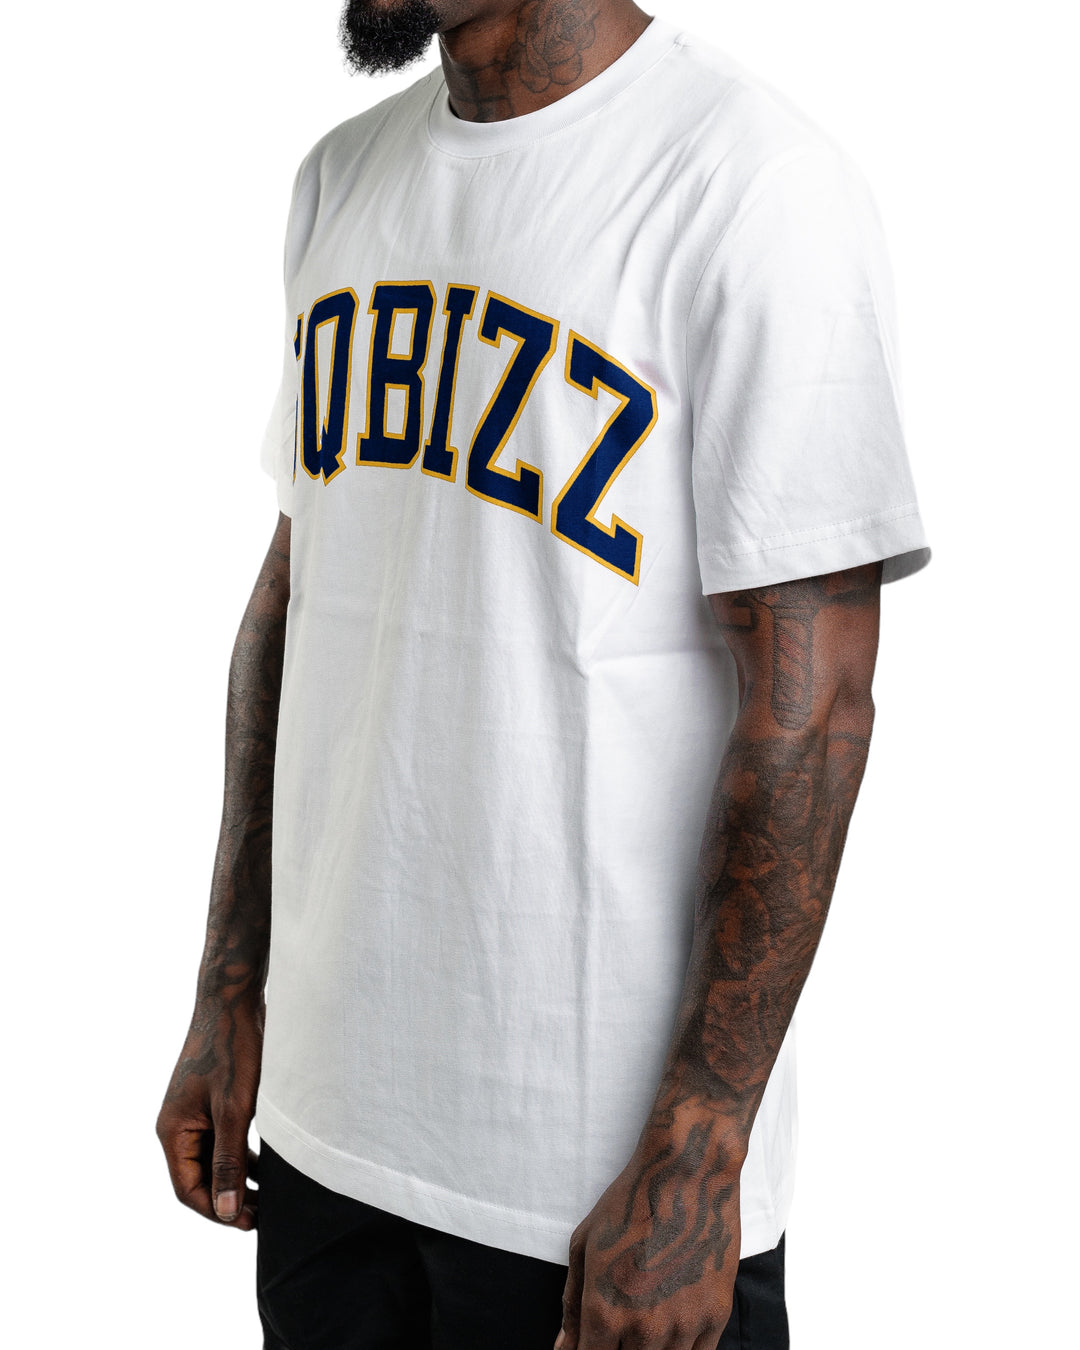 Arch Tee in White/Navy/Gold